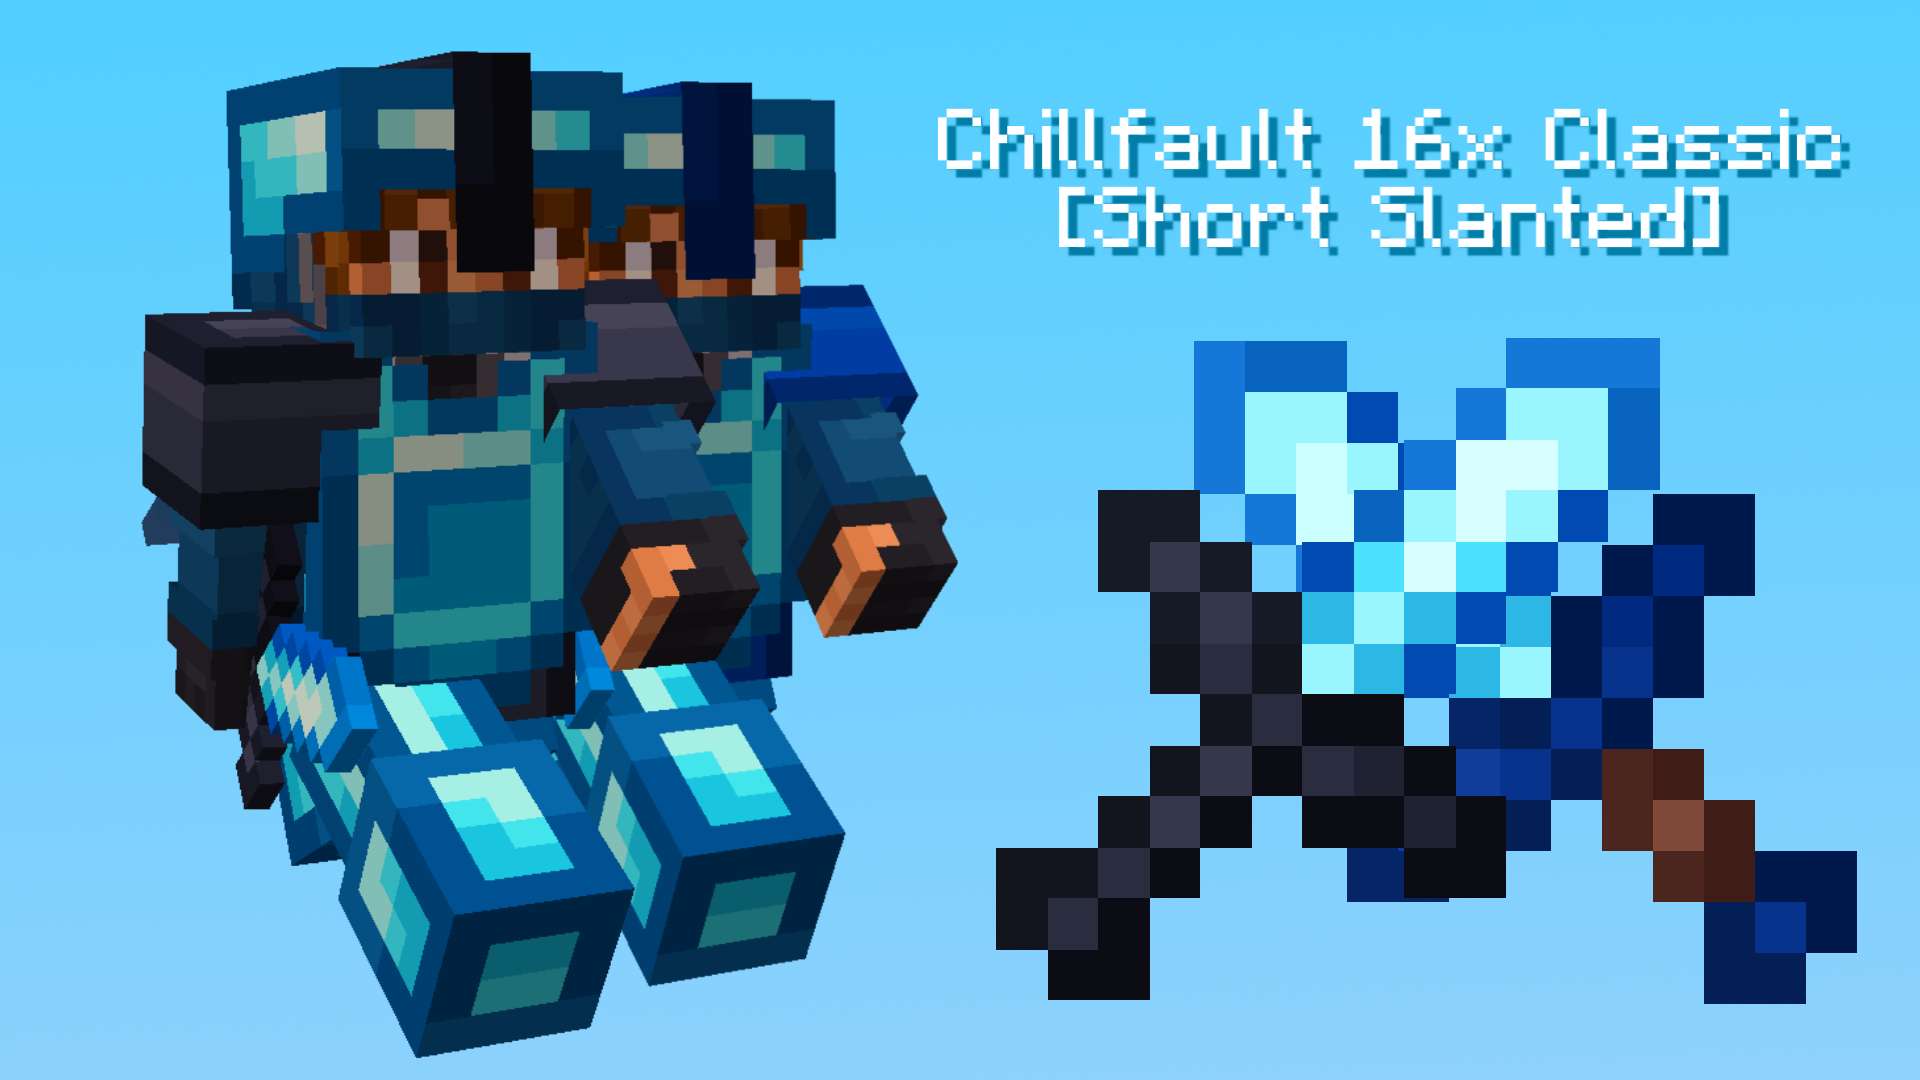 Chillfault 16x Classic [Short Slanted] 16x by Jes13 on PvPRP